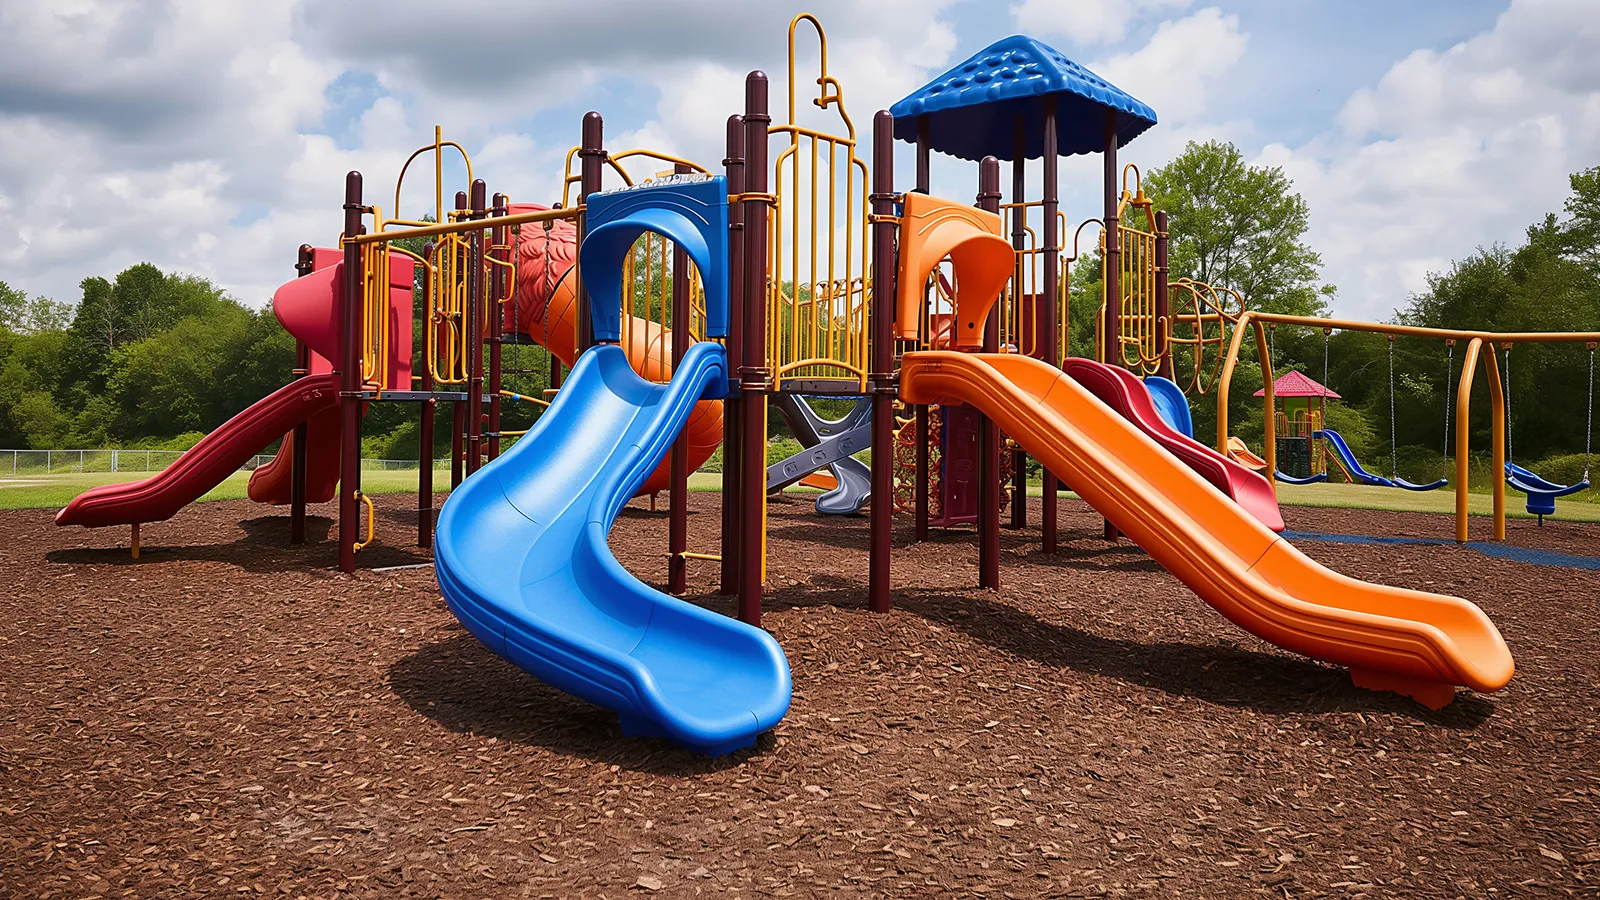 Rubber Mulch for Playground Covering vs. Wood Mulch